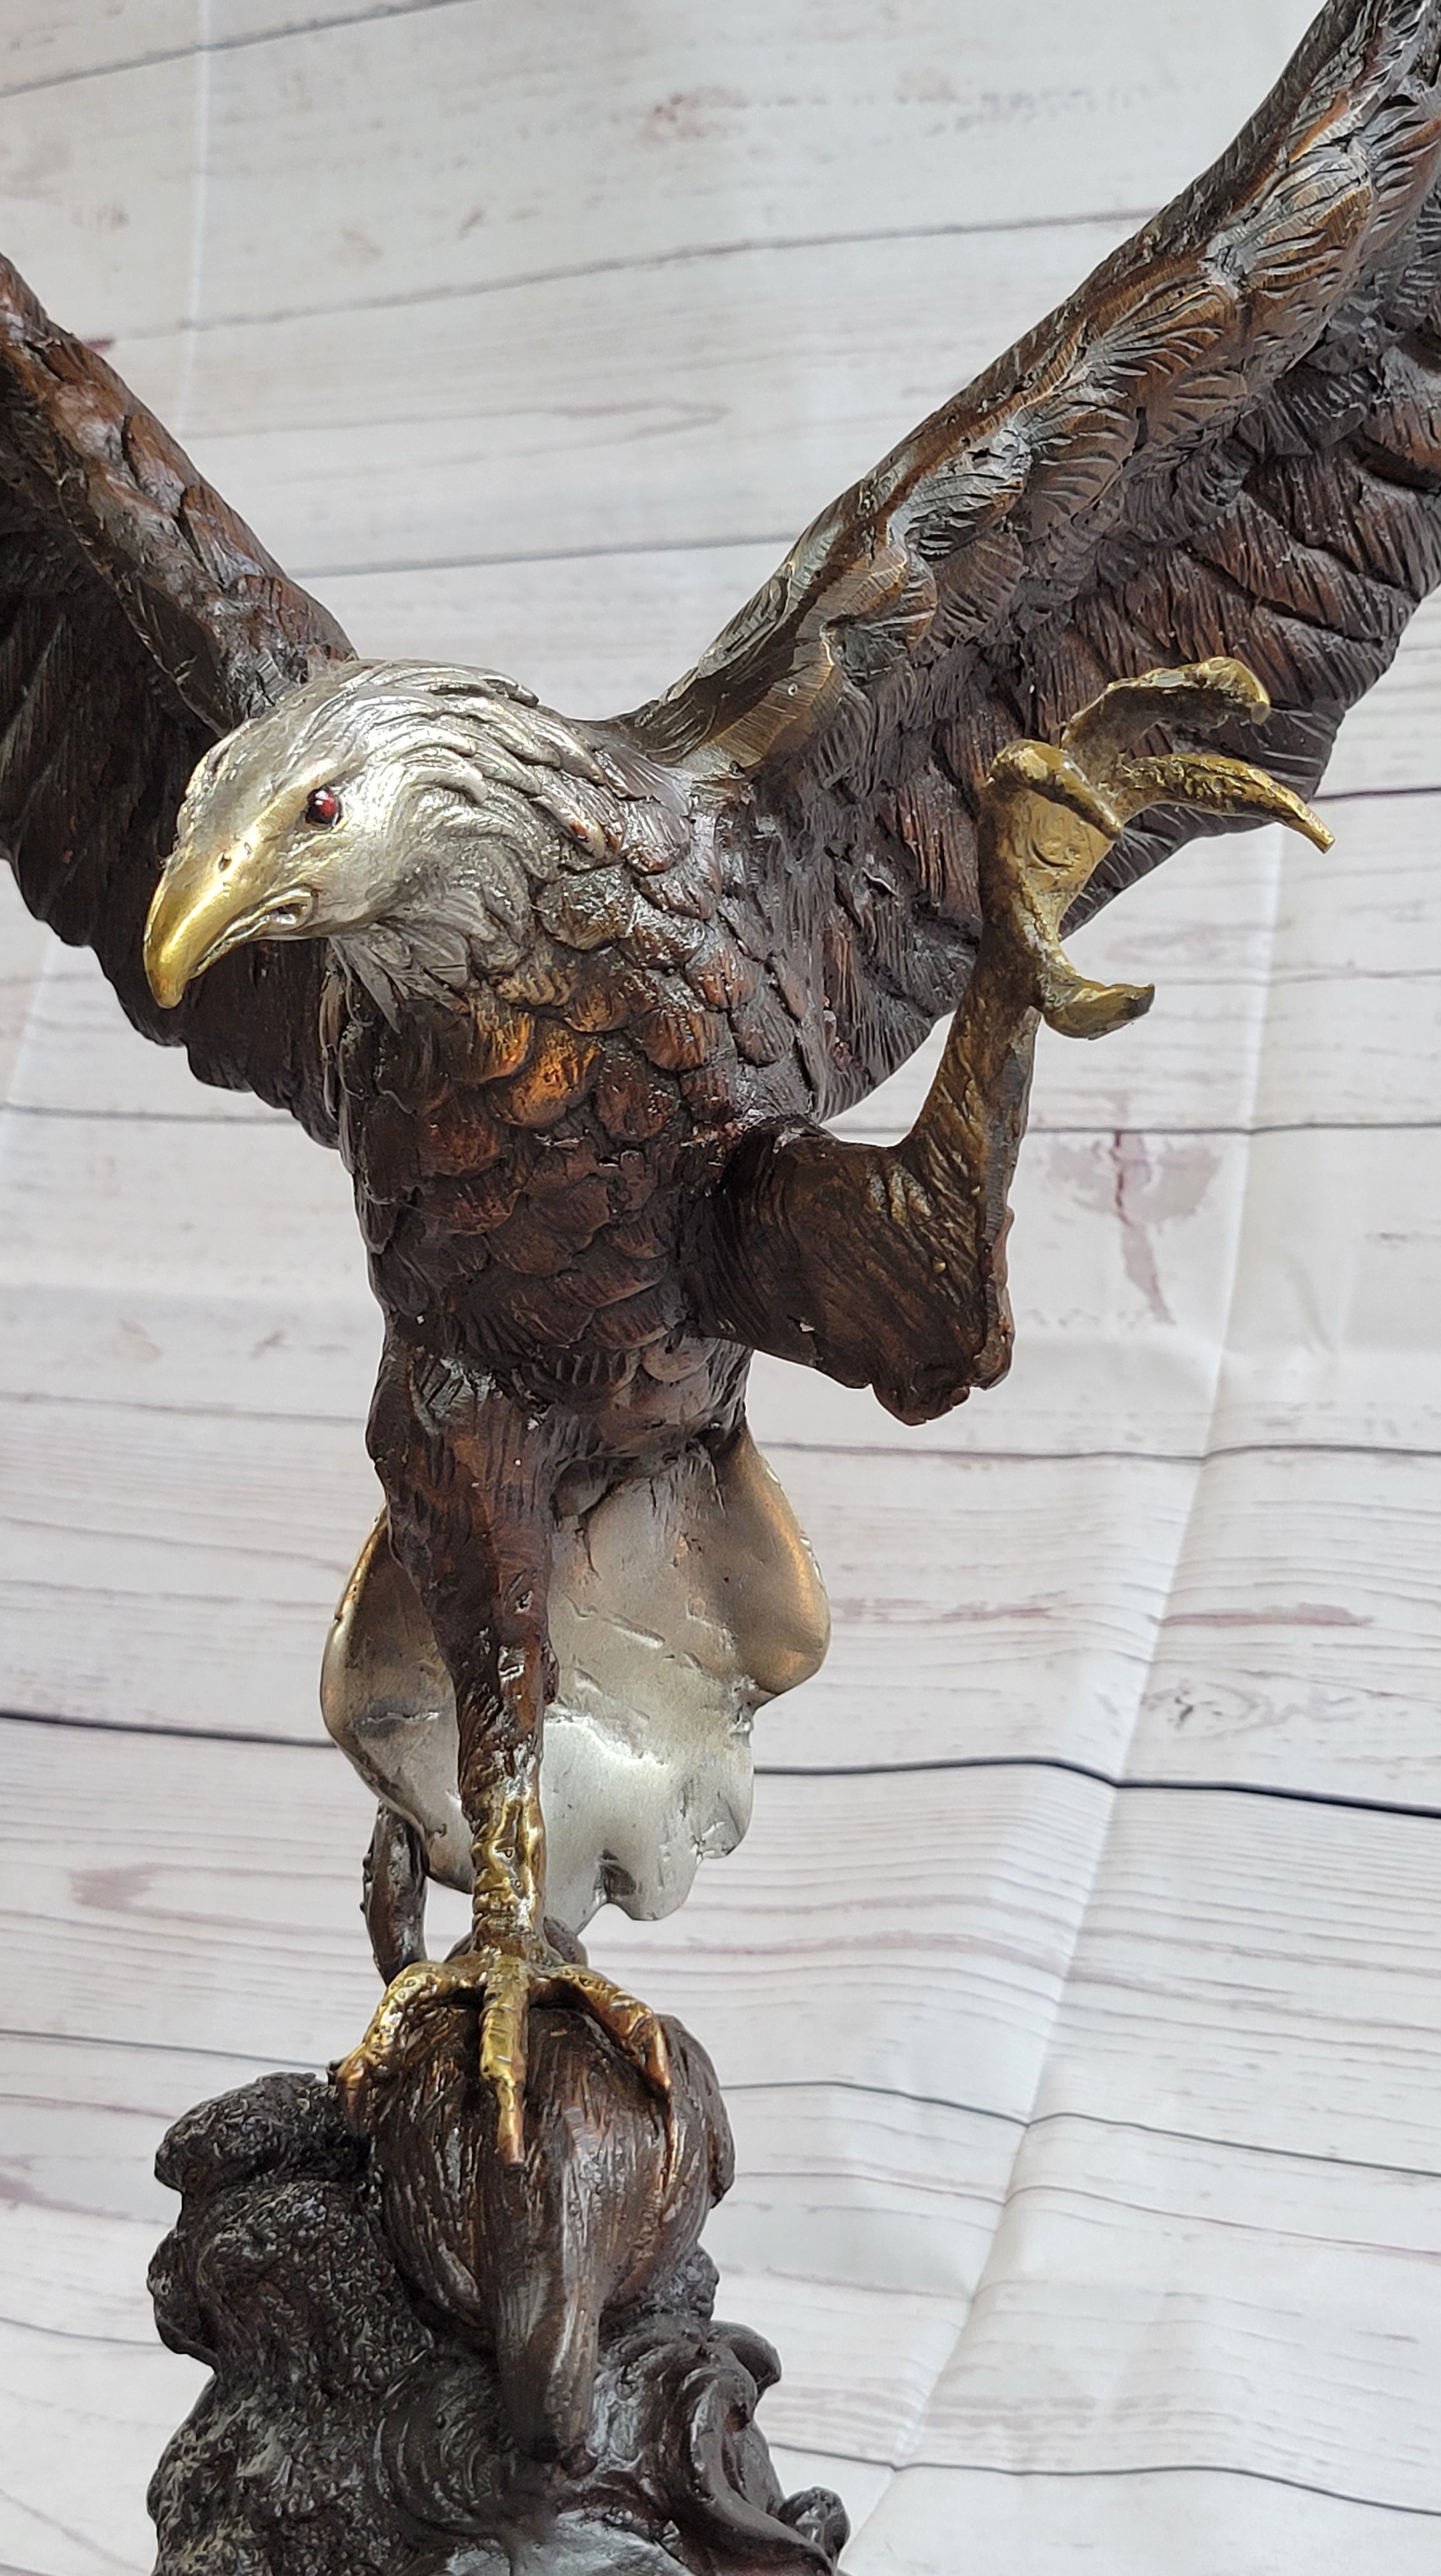 Signed Two Tone Moigniez Magnificent Large American Eagle Bronze Statue Figurine